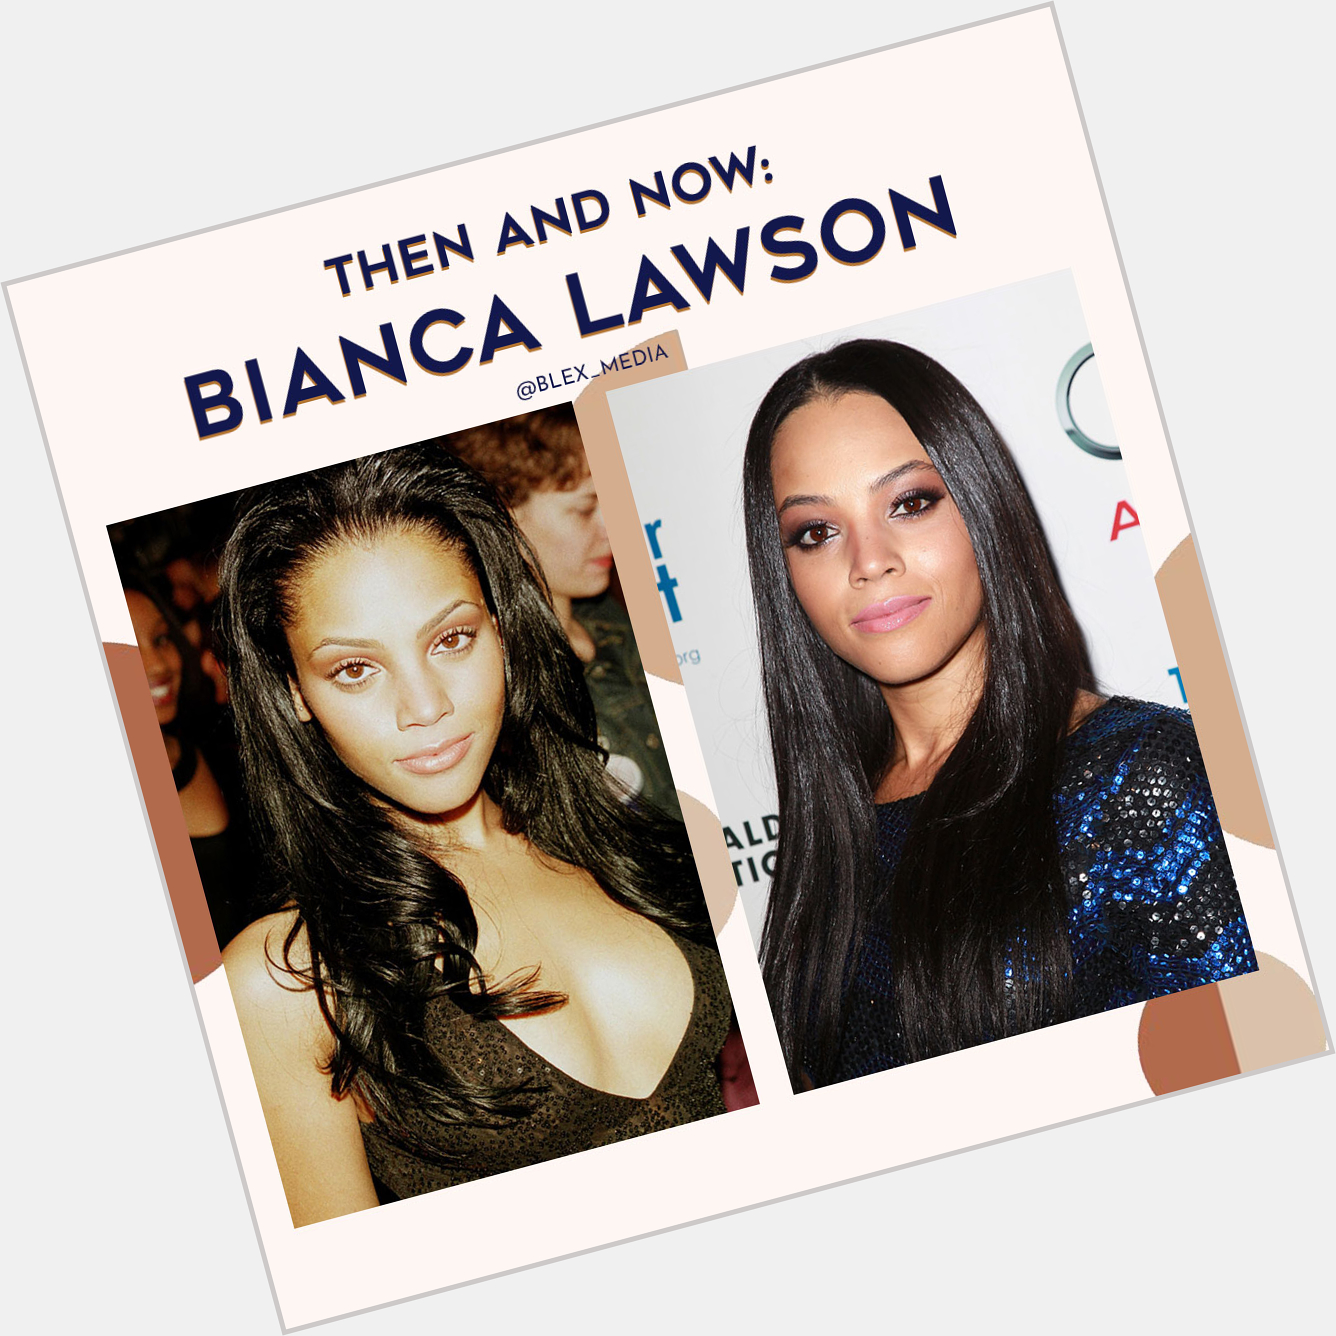 Happy Birthday to probably THE MOST ageless woman in Hollywood, Bianca Lawson. She turns 41 years old today.    